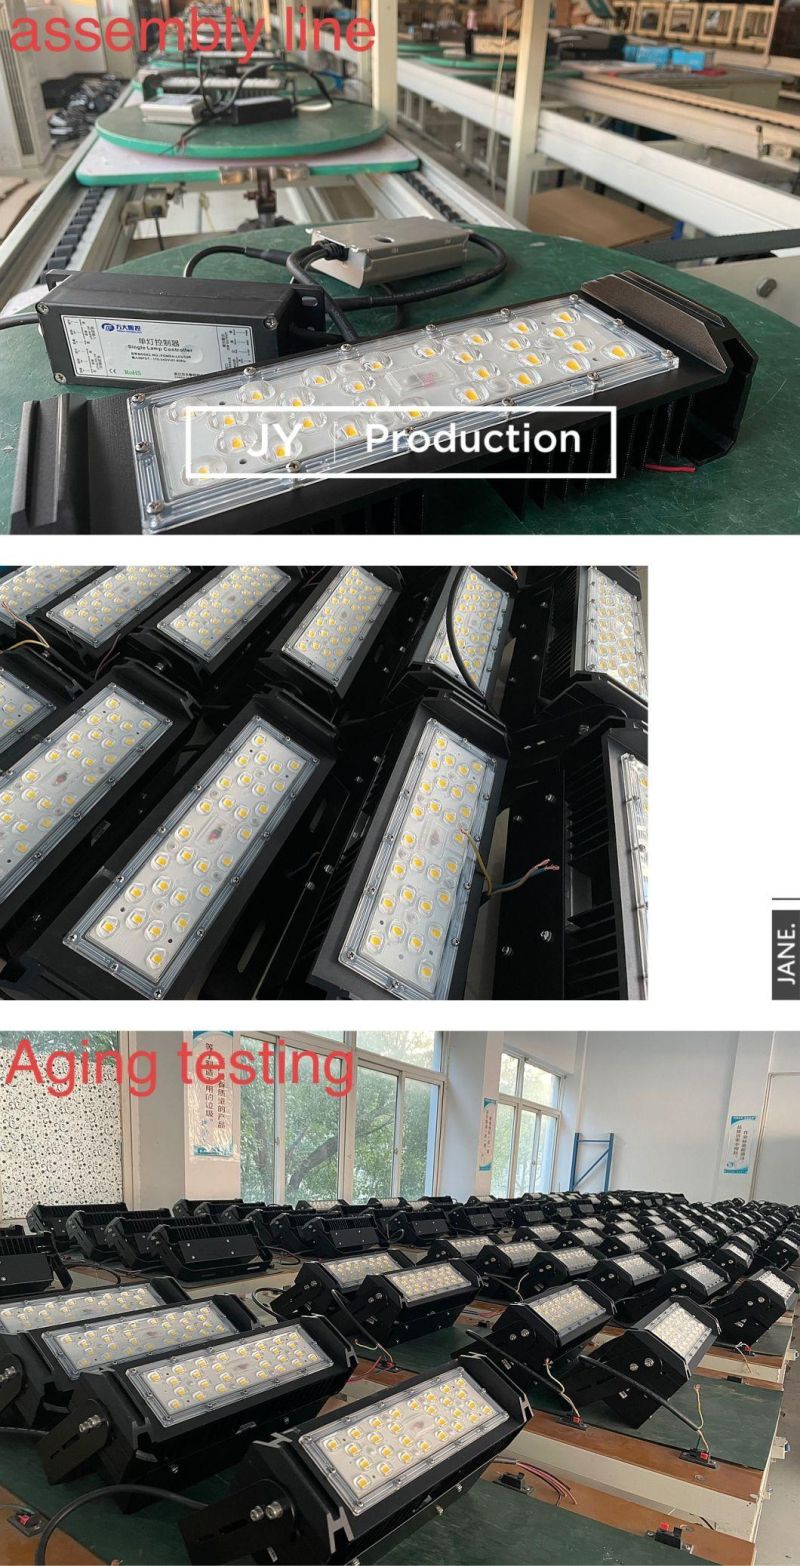 50W CE RoHS Outdoor IP66 High Light Efficiency LED Flood Light Flood Lamp LED Floodlight